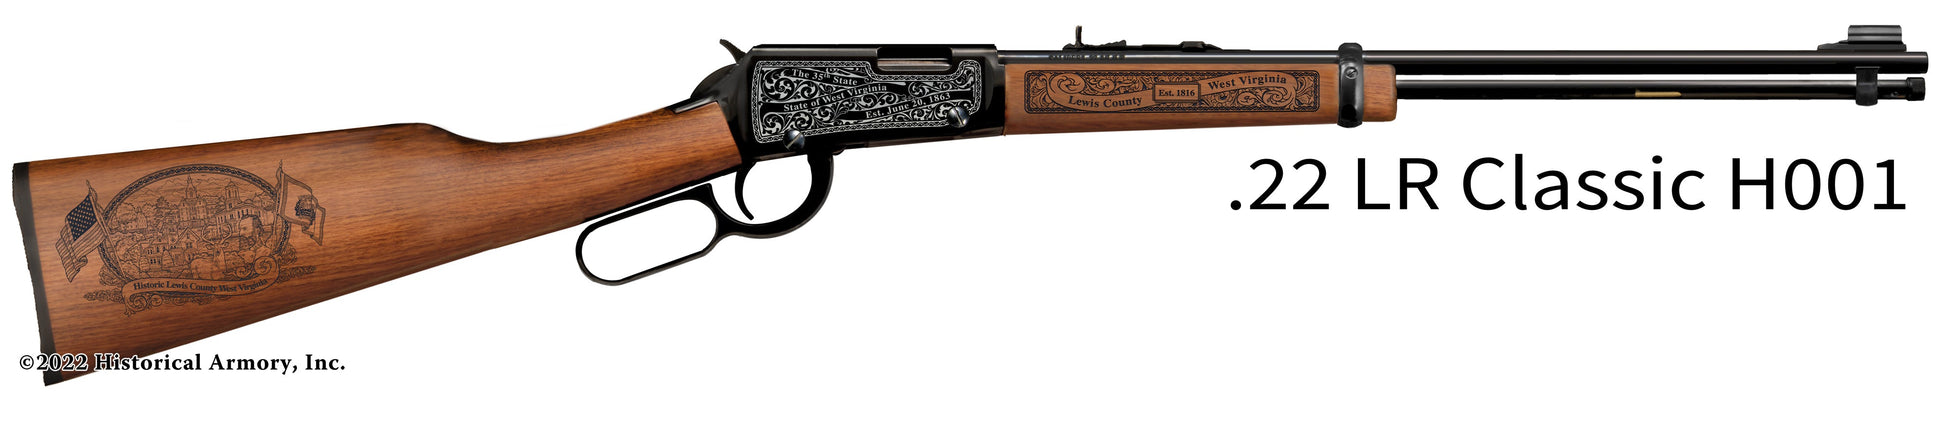 Lewis County West Virginia Engraved Henry H001 Rifle